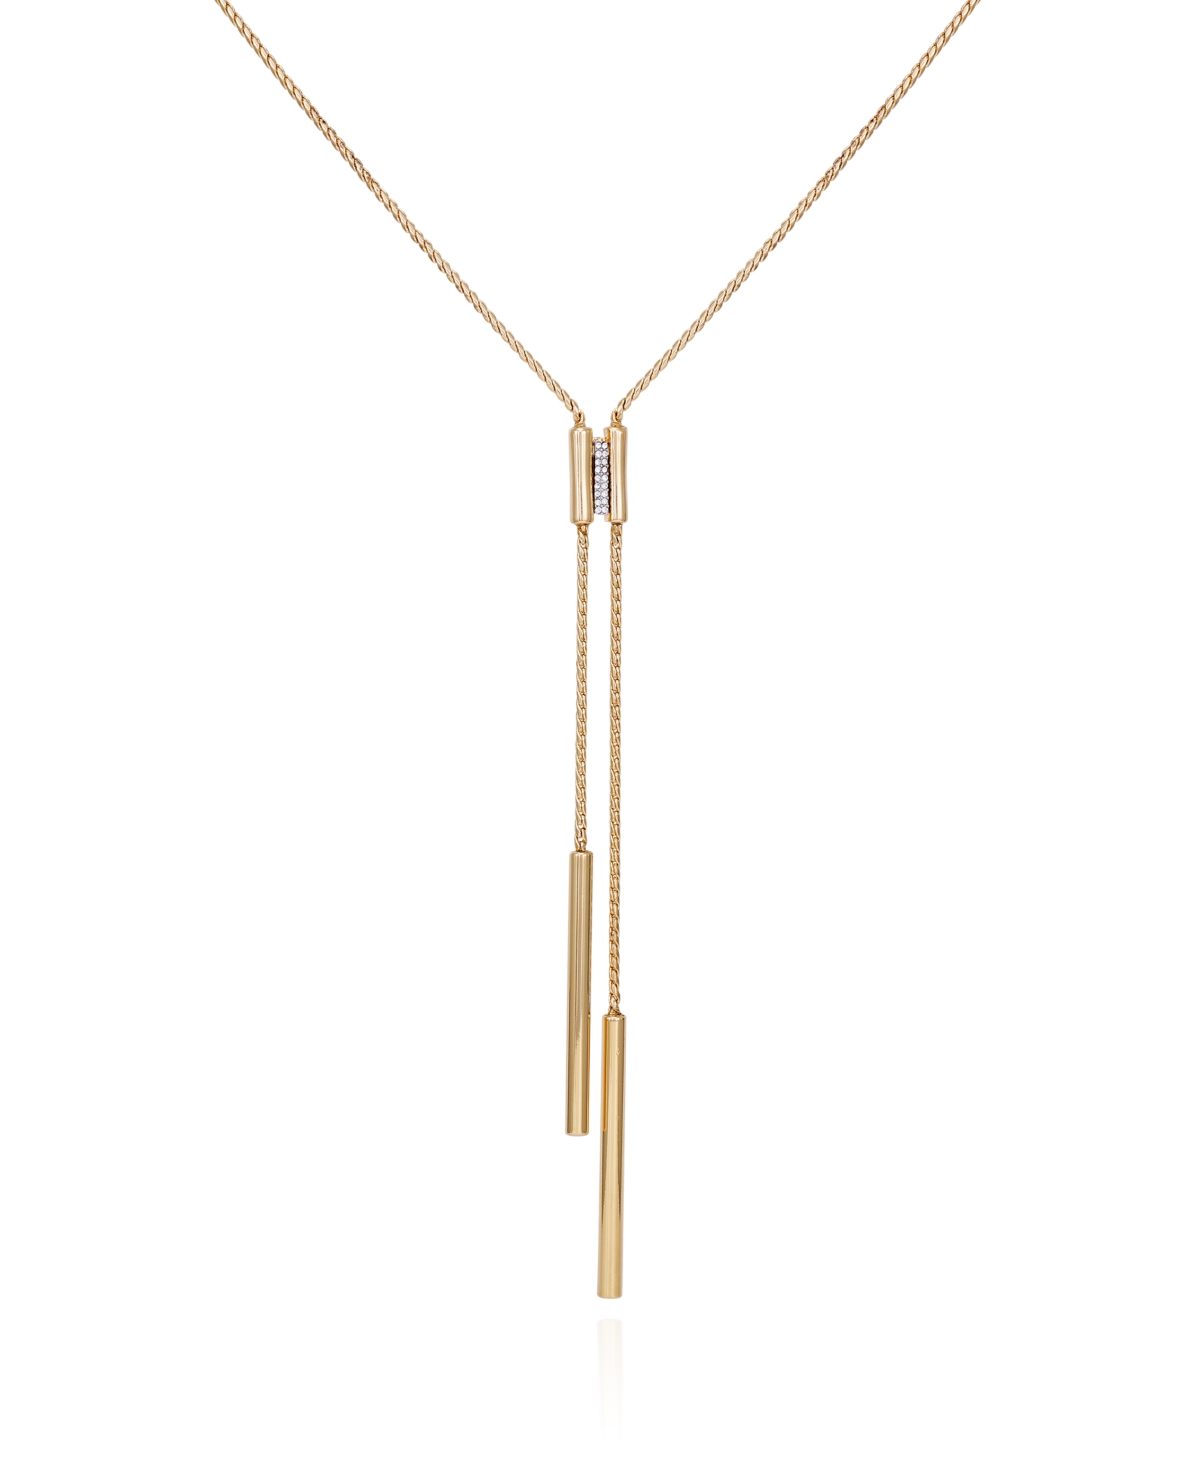 Gold-Tone Long Y-Necklace, 24" - Gold